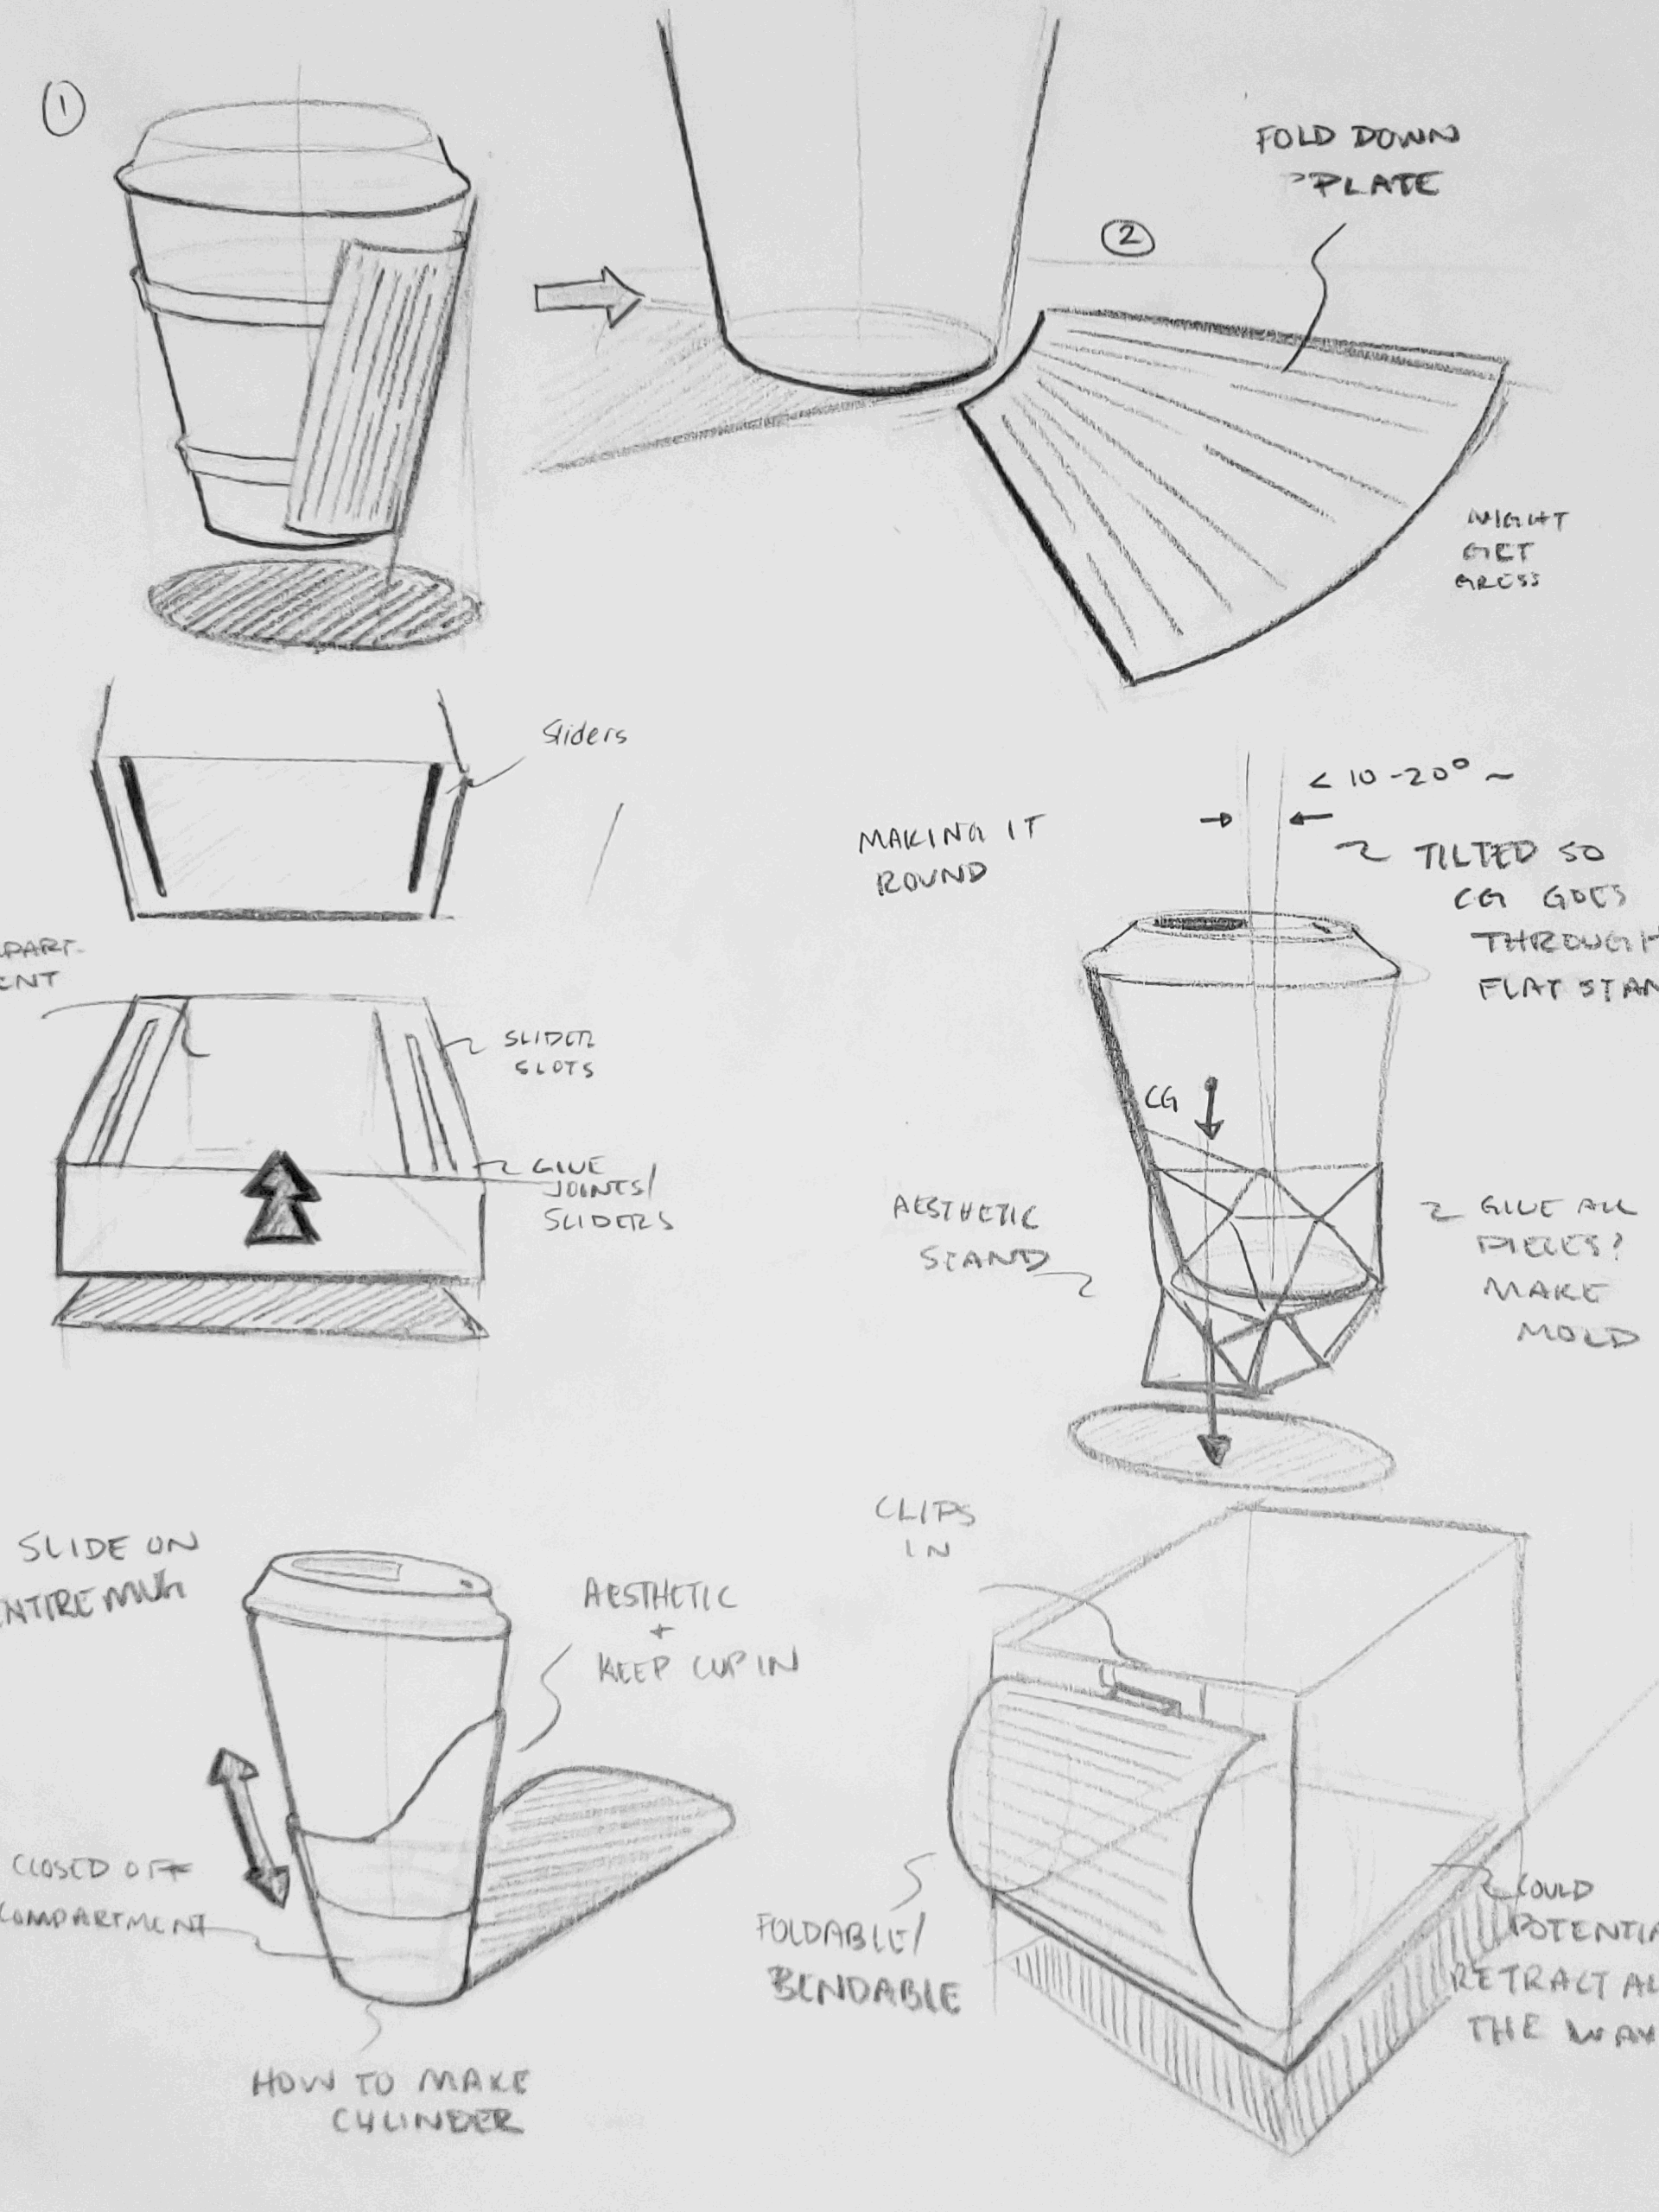 Langley Vogt's Cup Design Sketches, from brainstorm to presentable product.